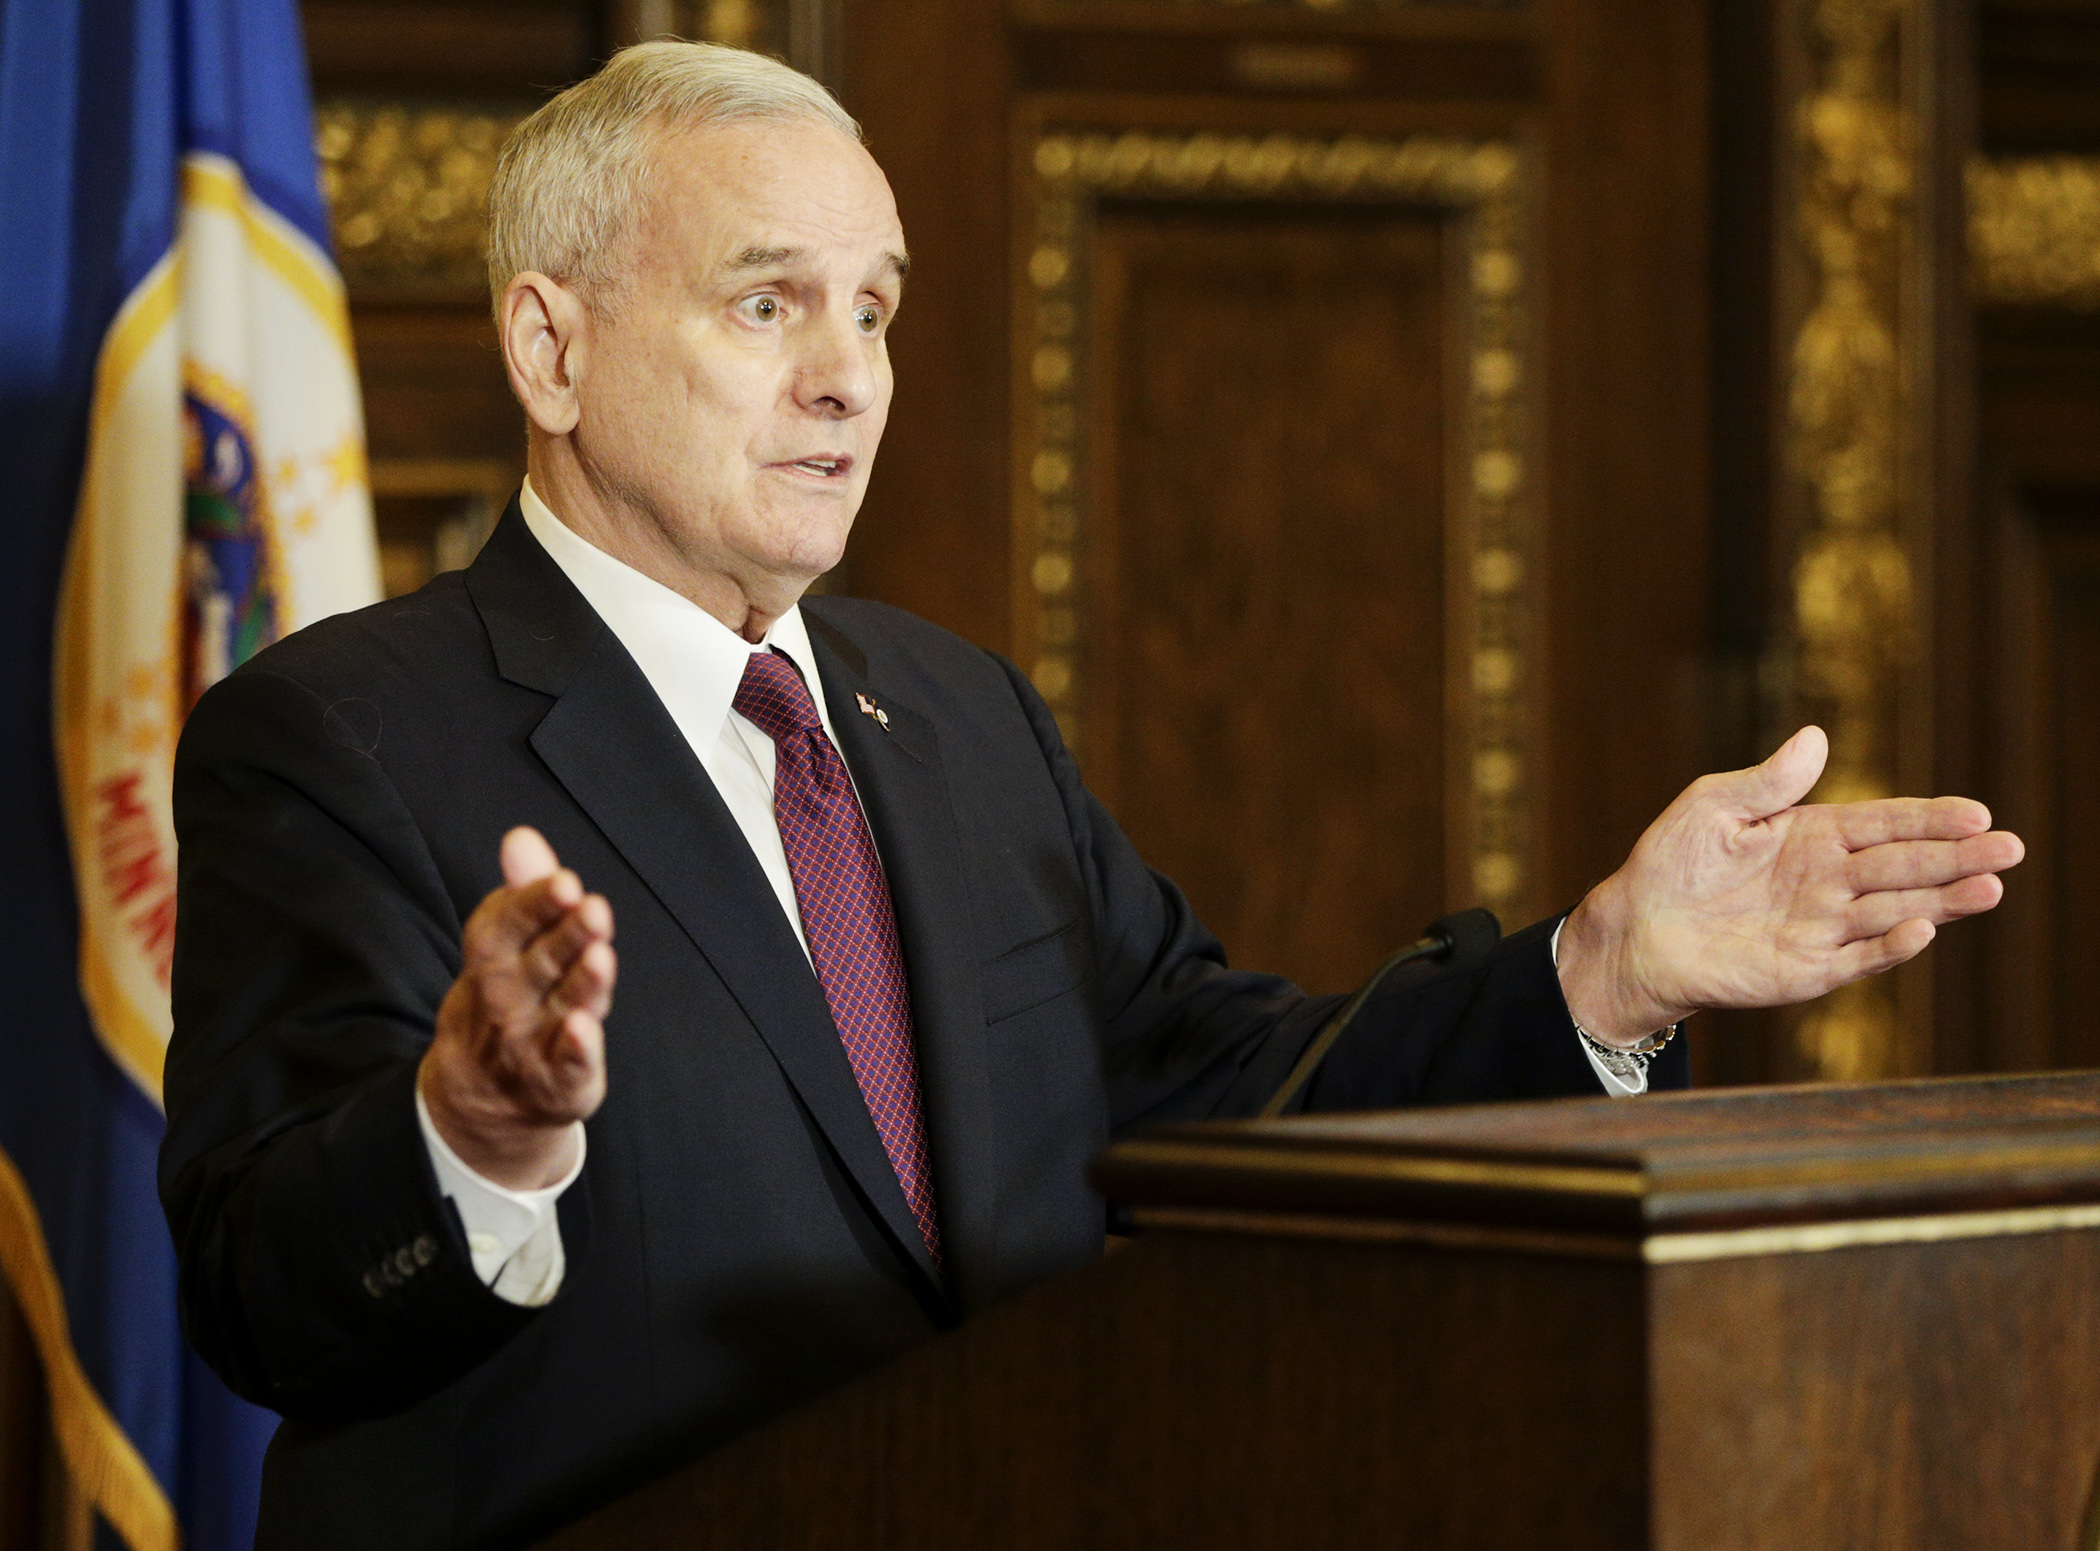 Gov. Mark Dayton comments at an April 7 press conference that he will be watching as the House and Senate begin their conference committee process after the Passover/Easter break. Photo by Paul Battaglia